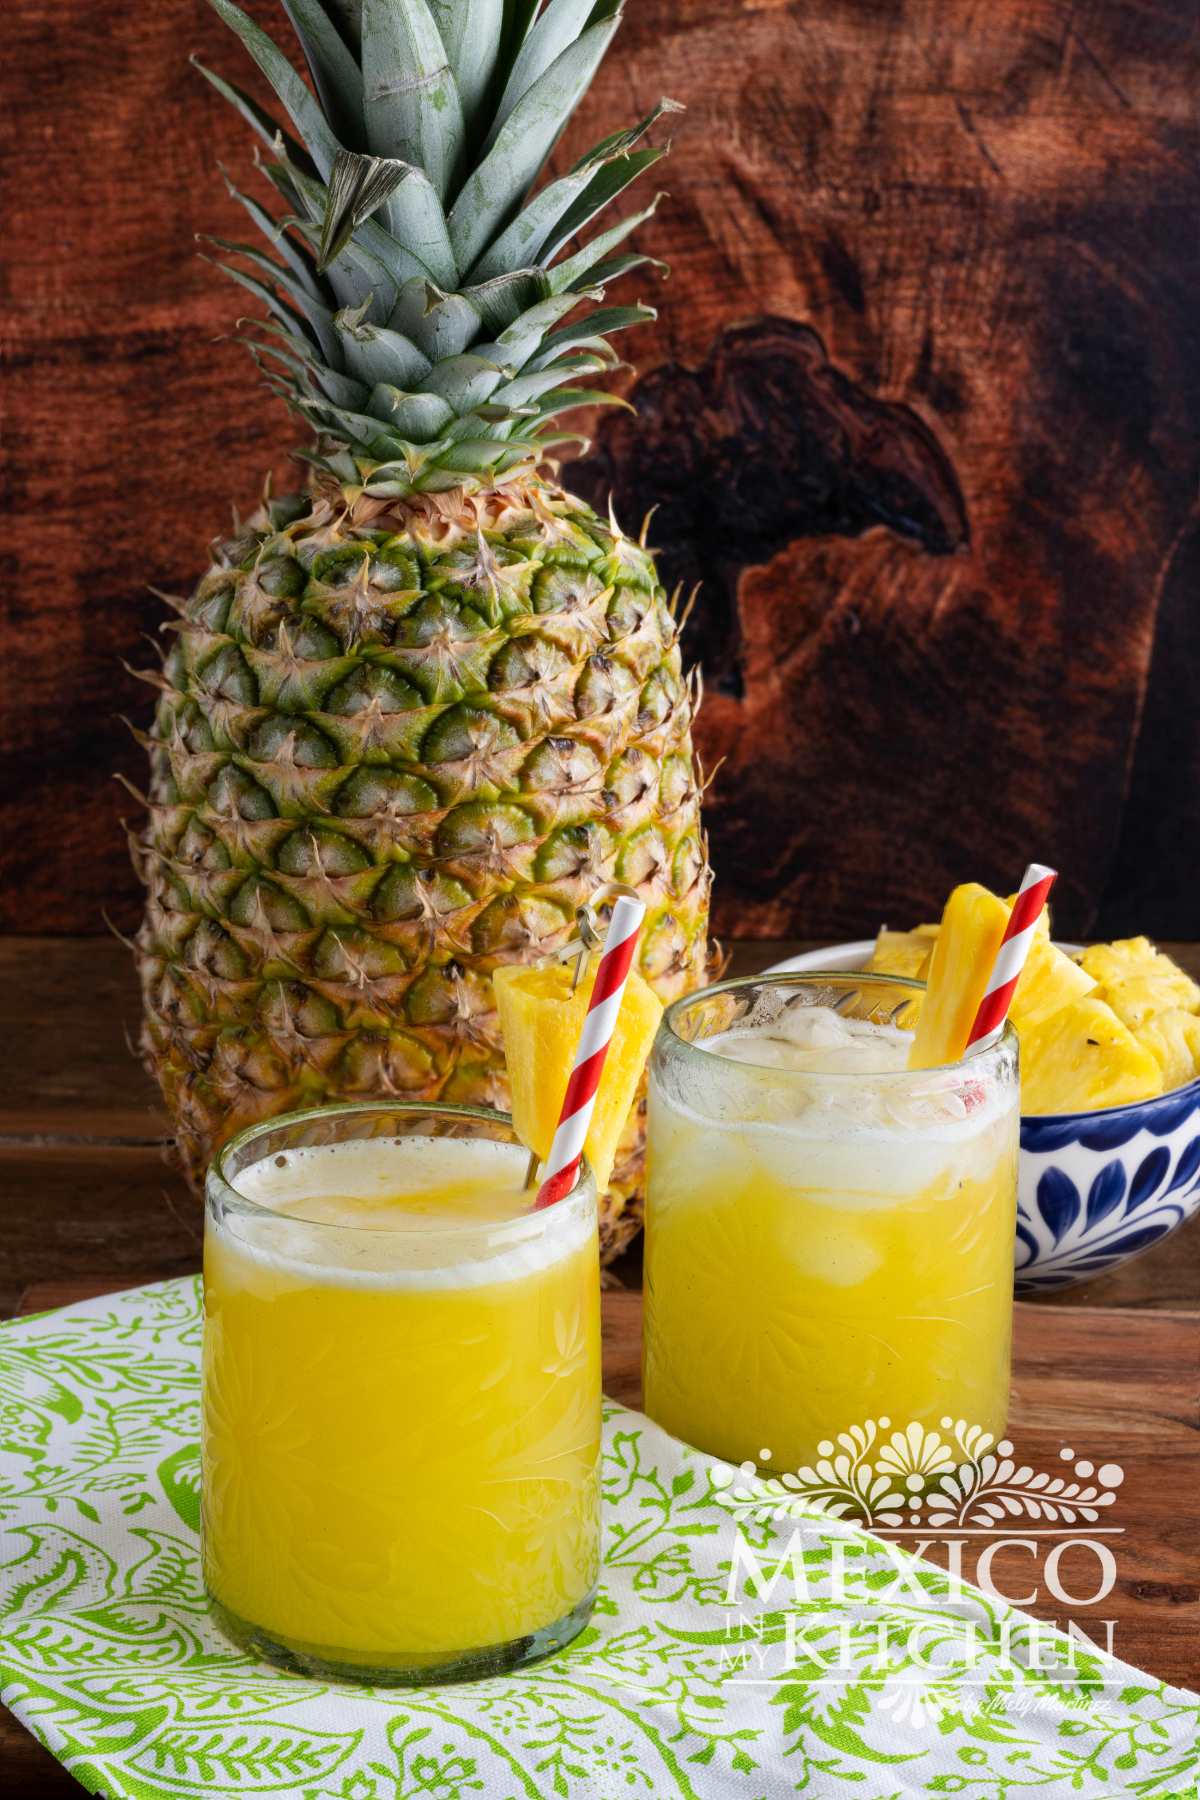 Agua de piña served in two glasses next to a pineapple and a bowl of pineapple chunks.